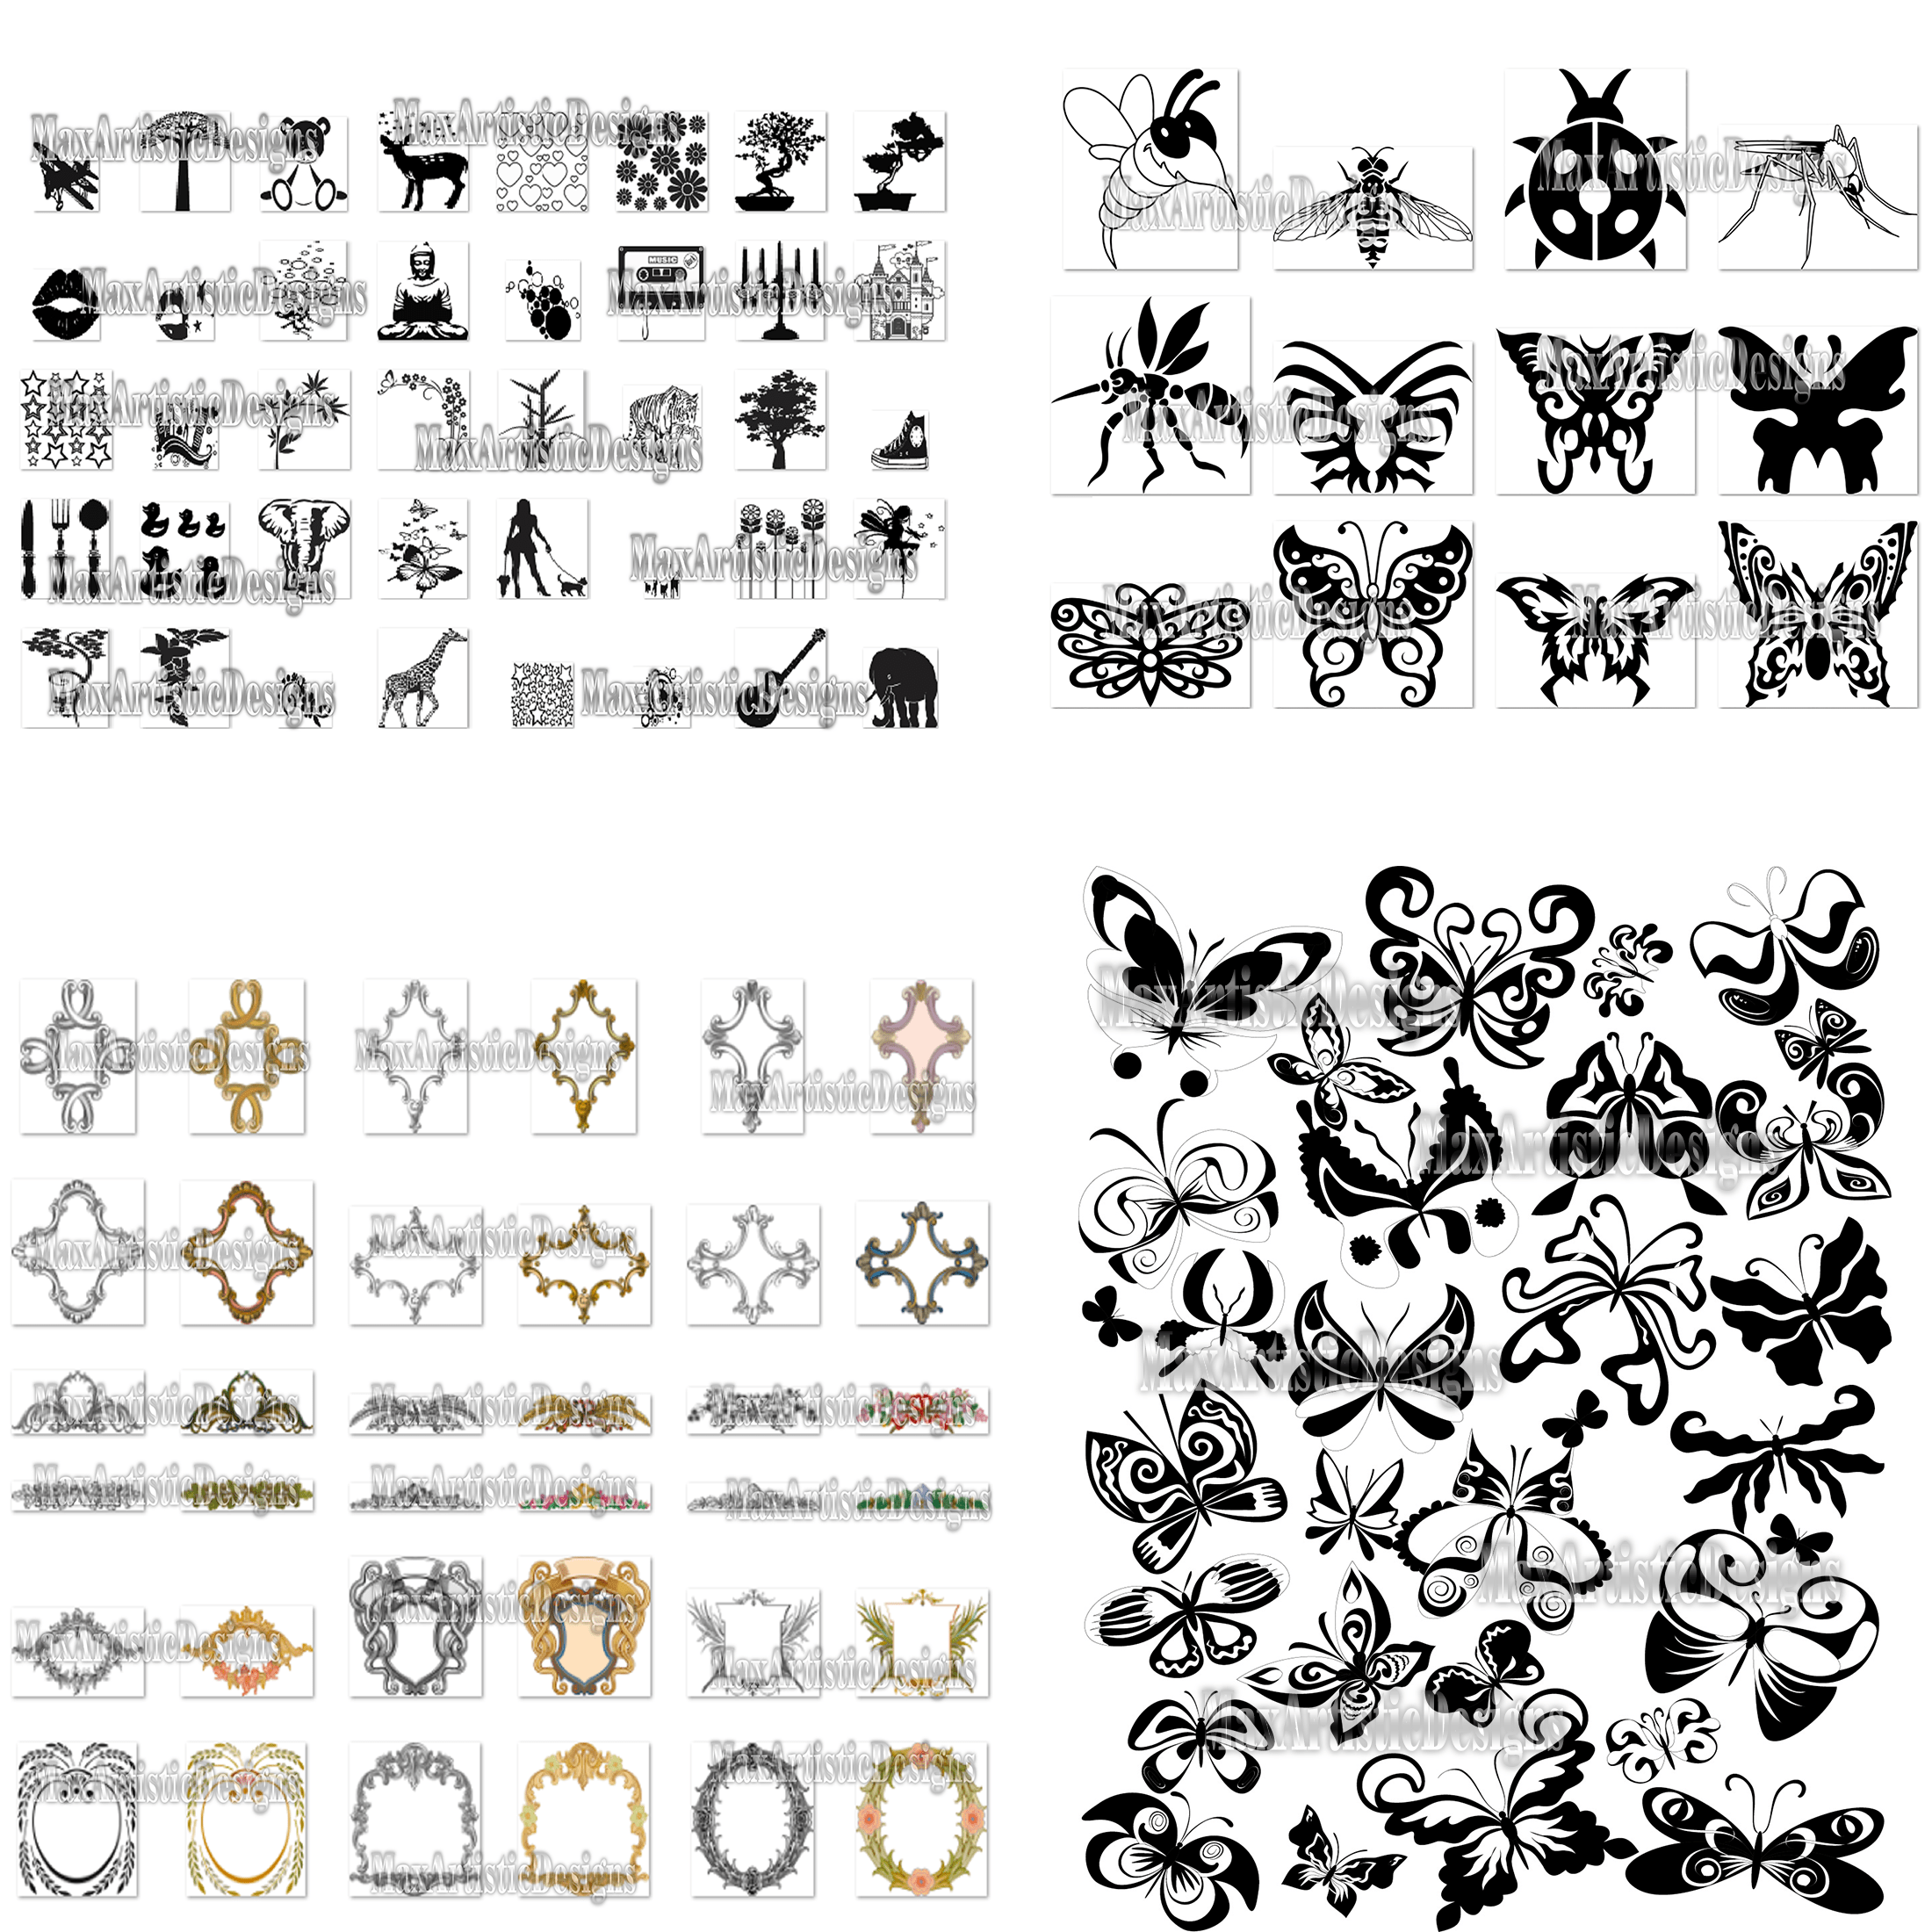 90,000+ cnc vectors dxf, cdr, 20 gb art for laser cutting, cnc router, waterjet, and more digital download